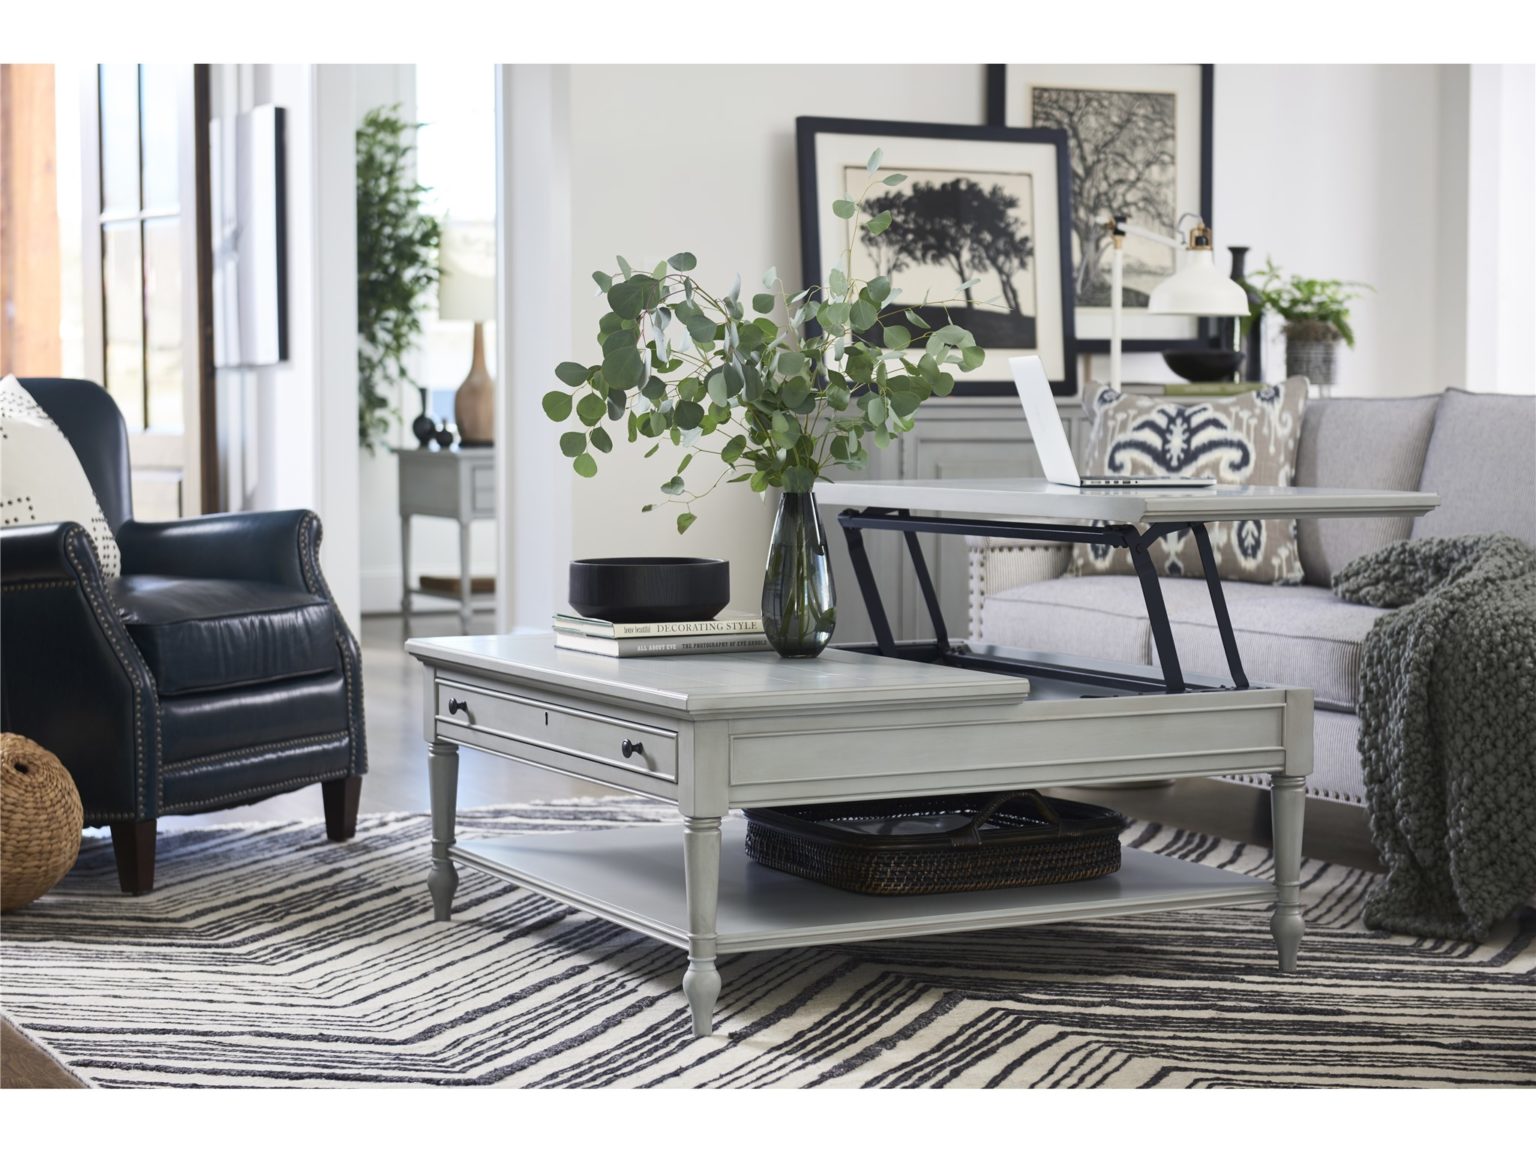 SUMMER HILL LIFT TOP COFFEE TABLE